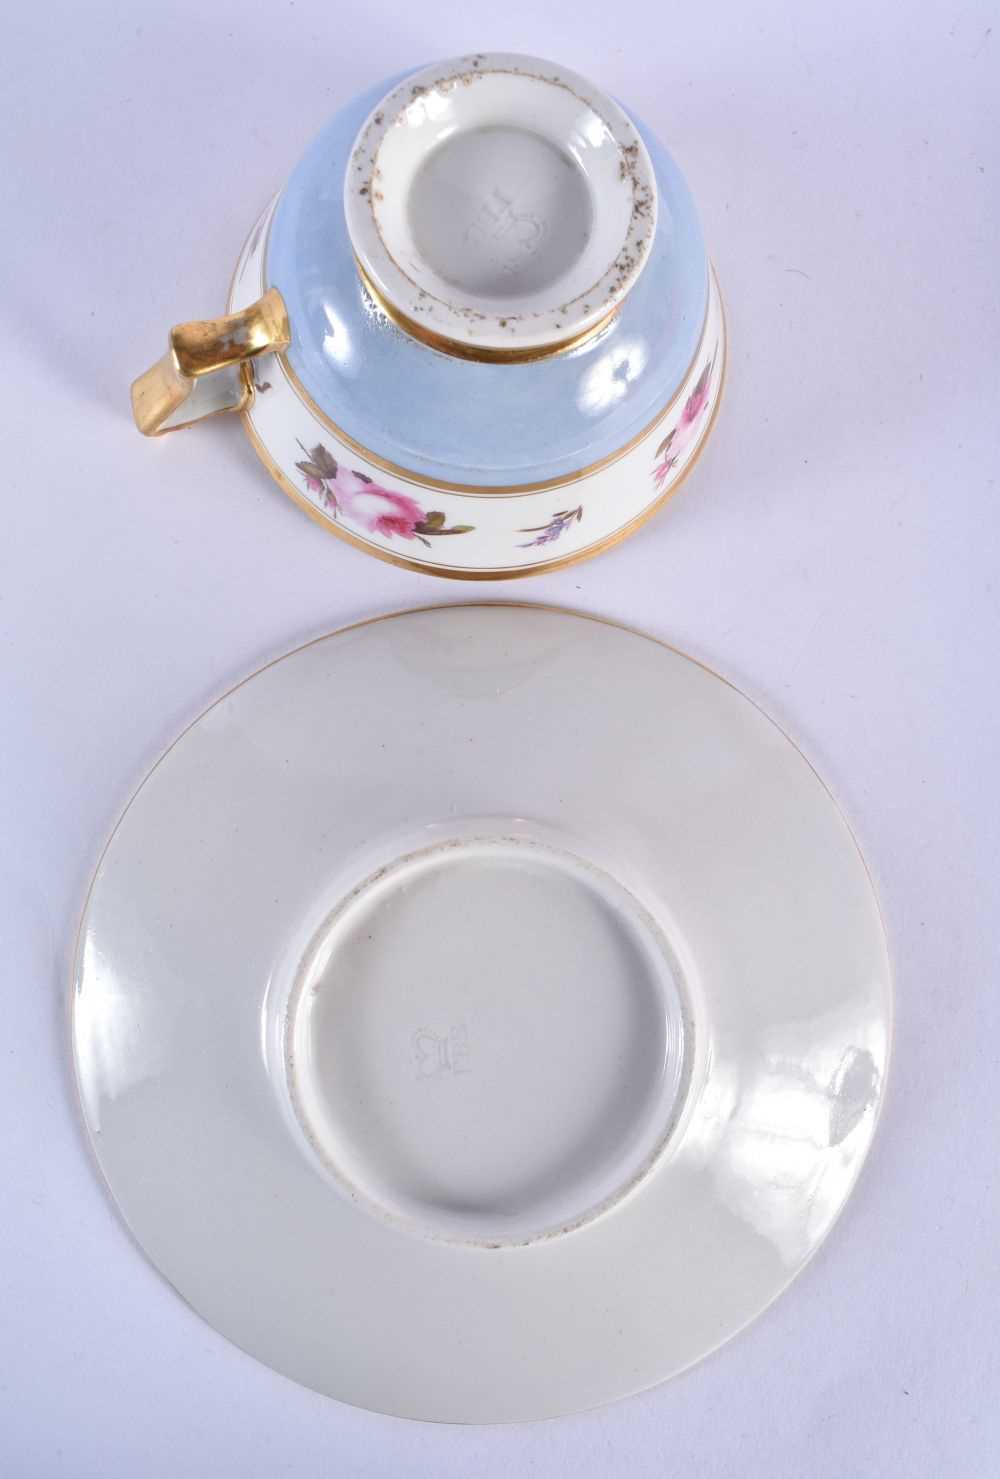 Flight Barr and Barr Worcester teacup and saucer, the saucer with central roses enclosed by a band - Image 3 of 6